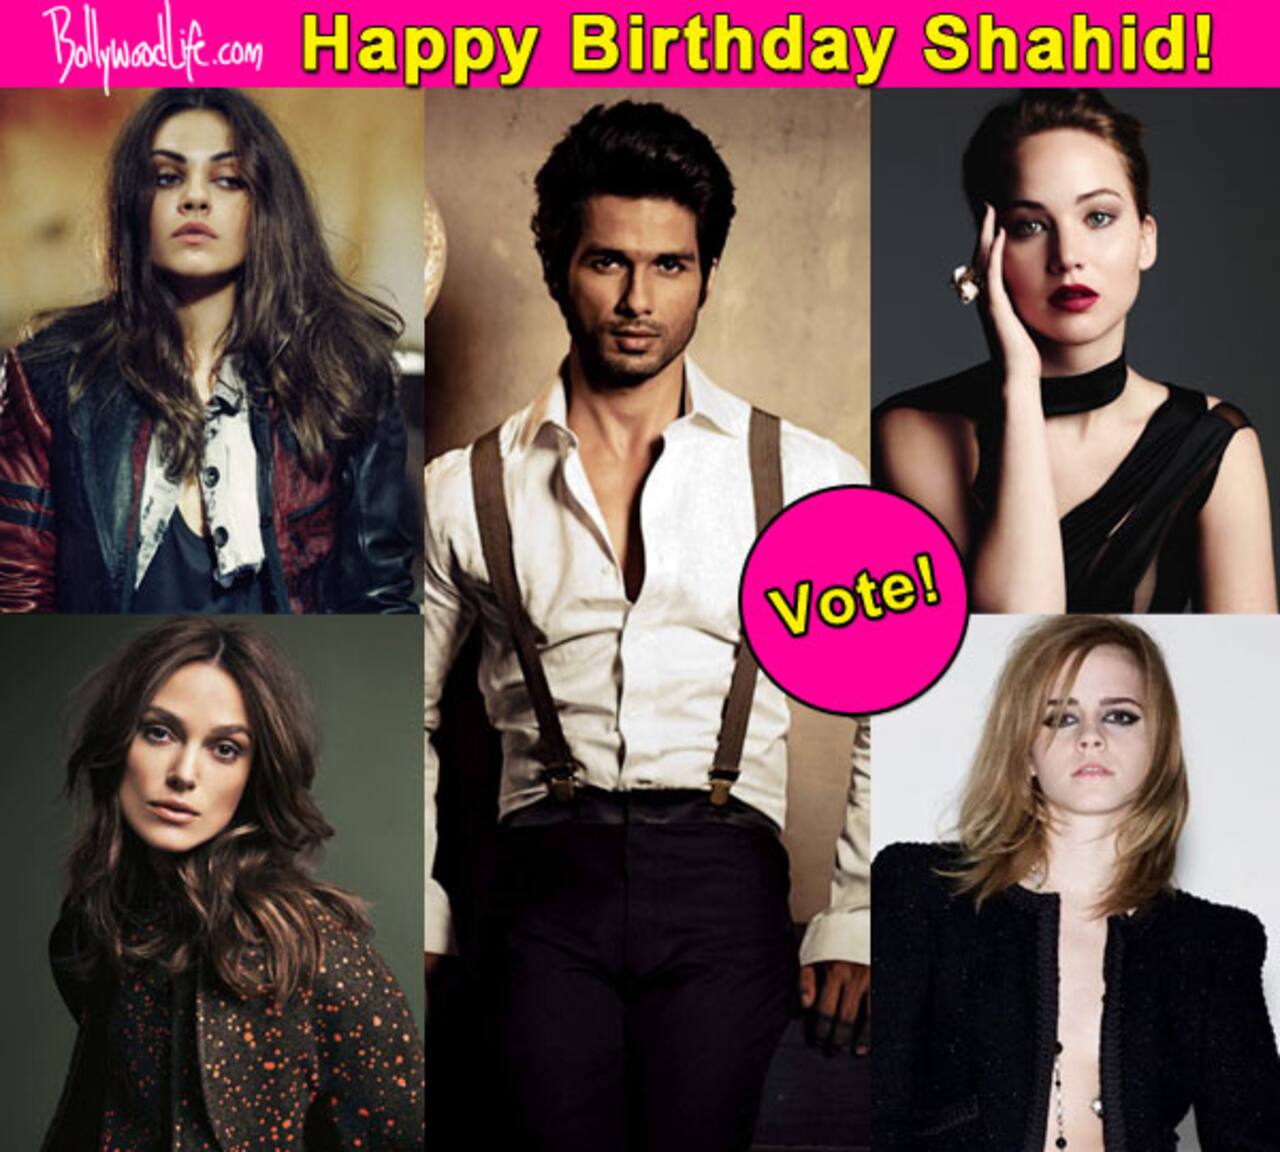 Emma Watson, Jennifer Lawrence, Megan Fox- which Hollywood actress looks the best with Shahid Kapoor? Vote!